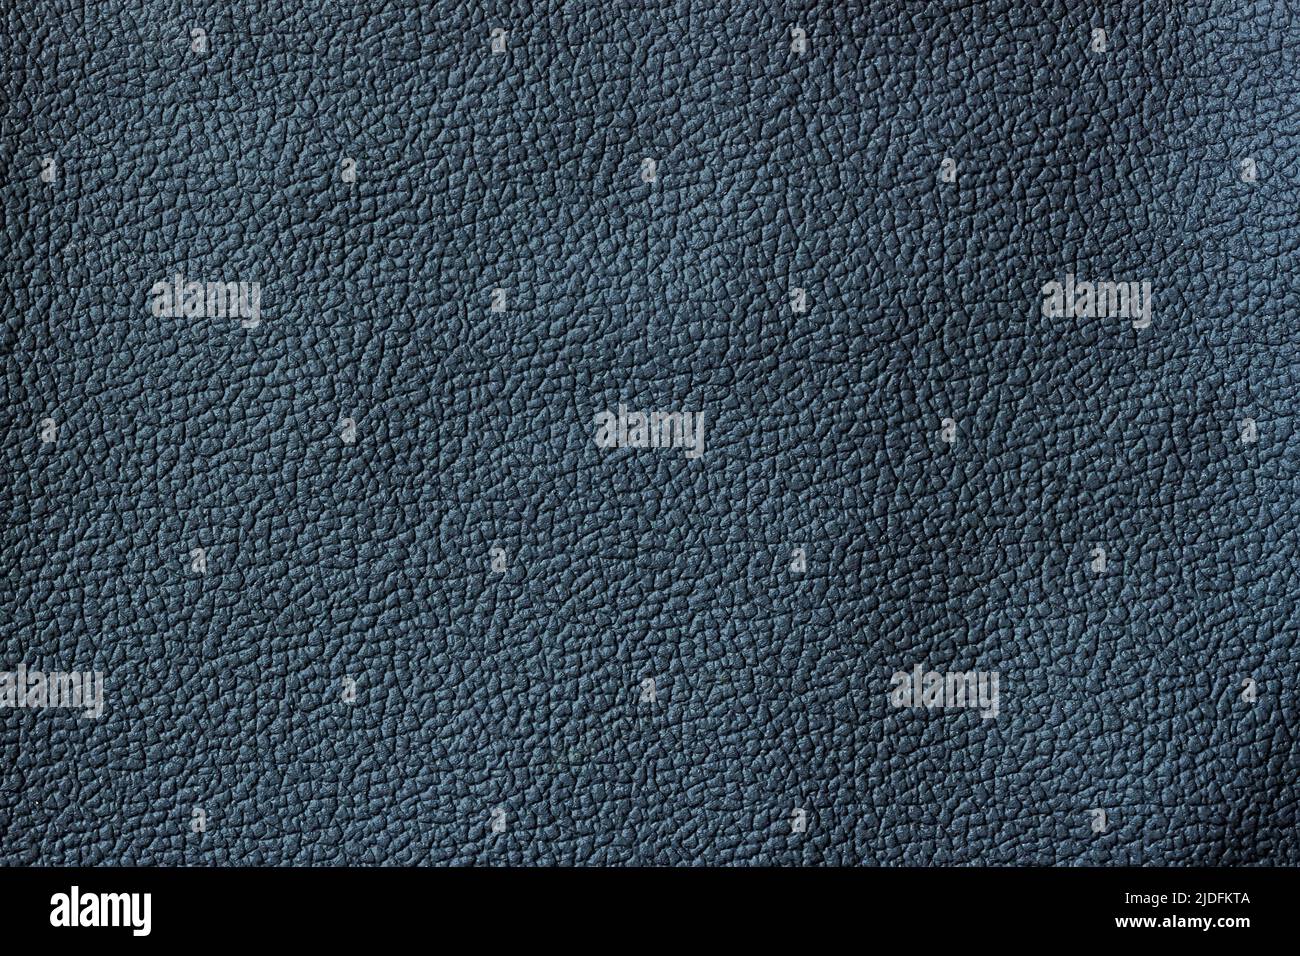 Texture of dark genuine leather close-up, granular texture of surface Stock Photo